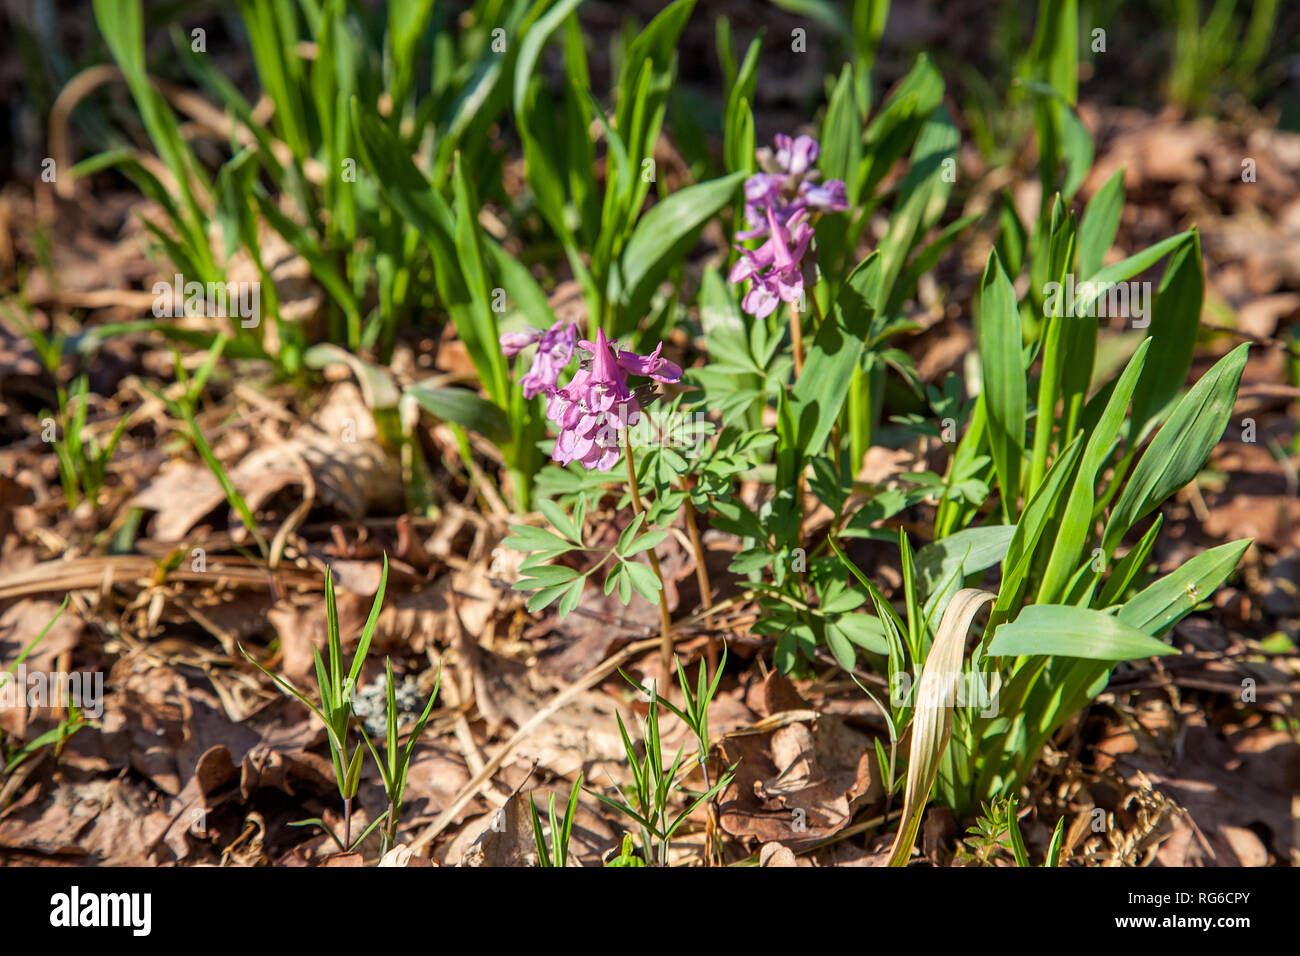 Close up view of purple wild flowers of Corydalis in spring forest. Natural spring background - Corydalis solida (fumewort) flowers at spring time. Stock Photo